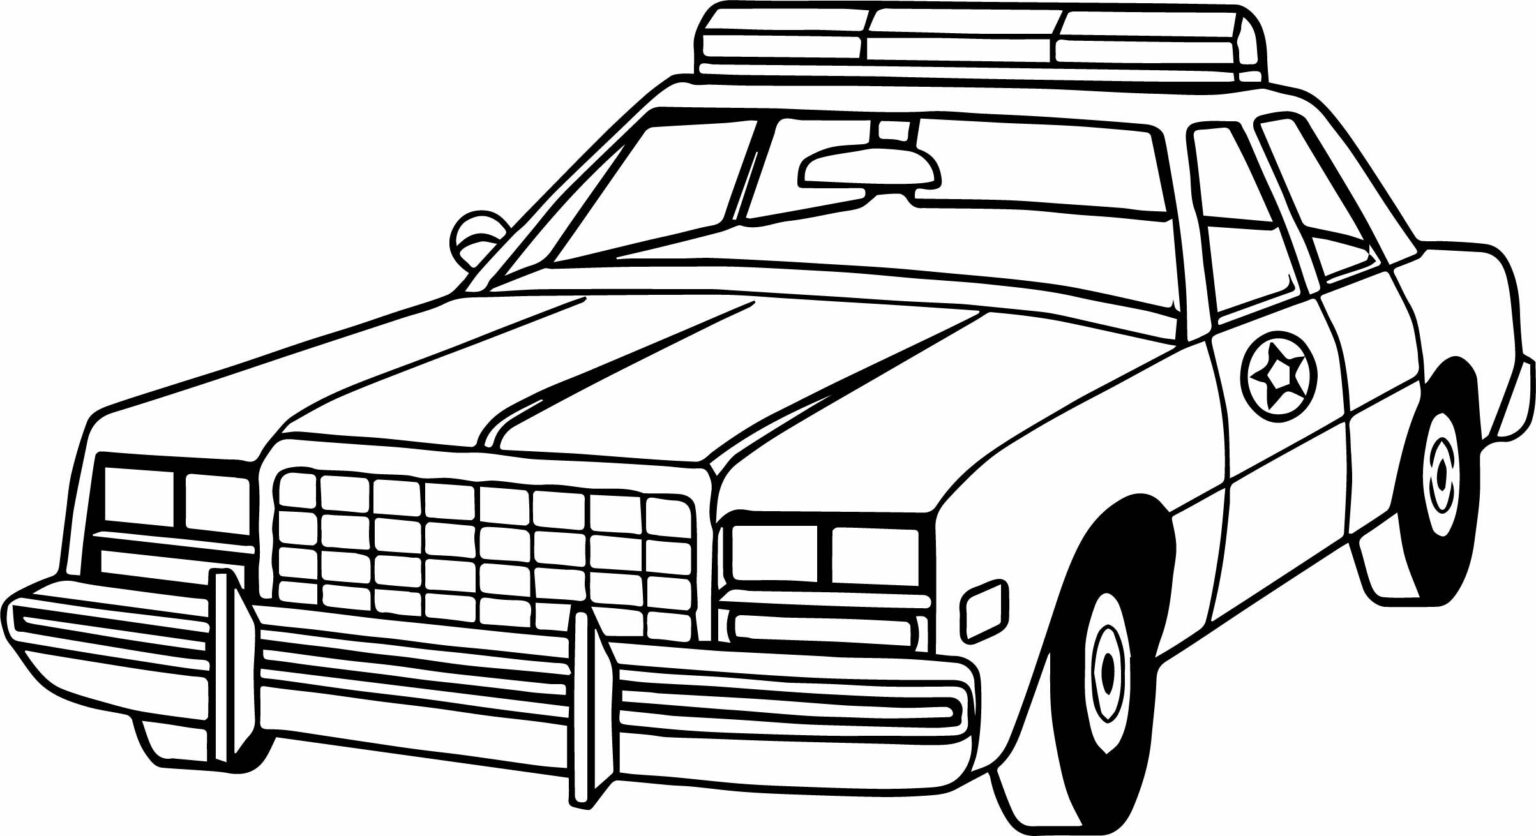 Free Printable Police Car Coloring Pages Pdf - Coloringfolder.com